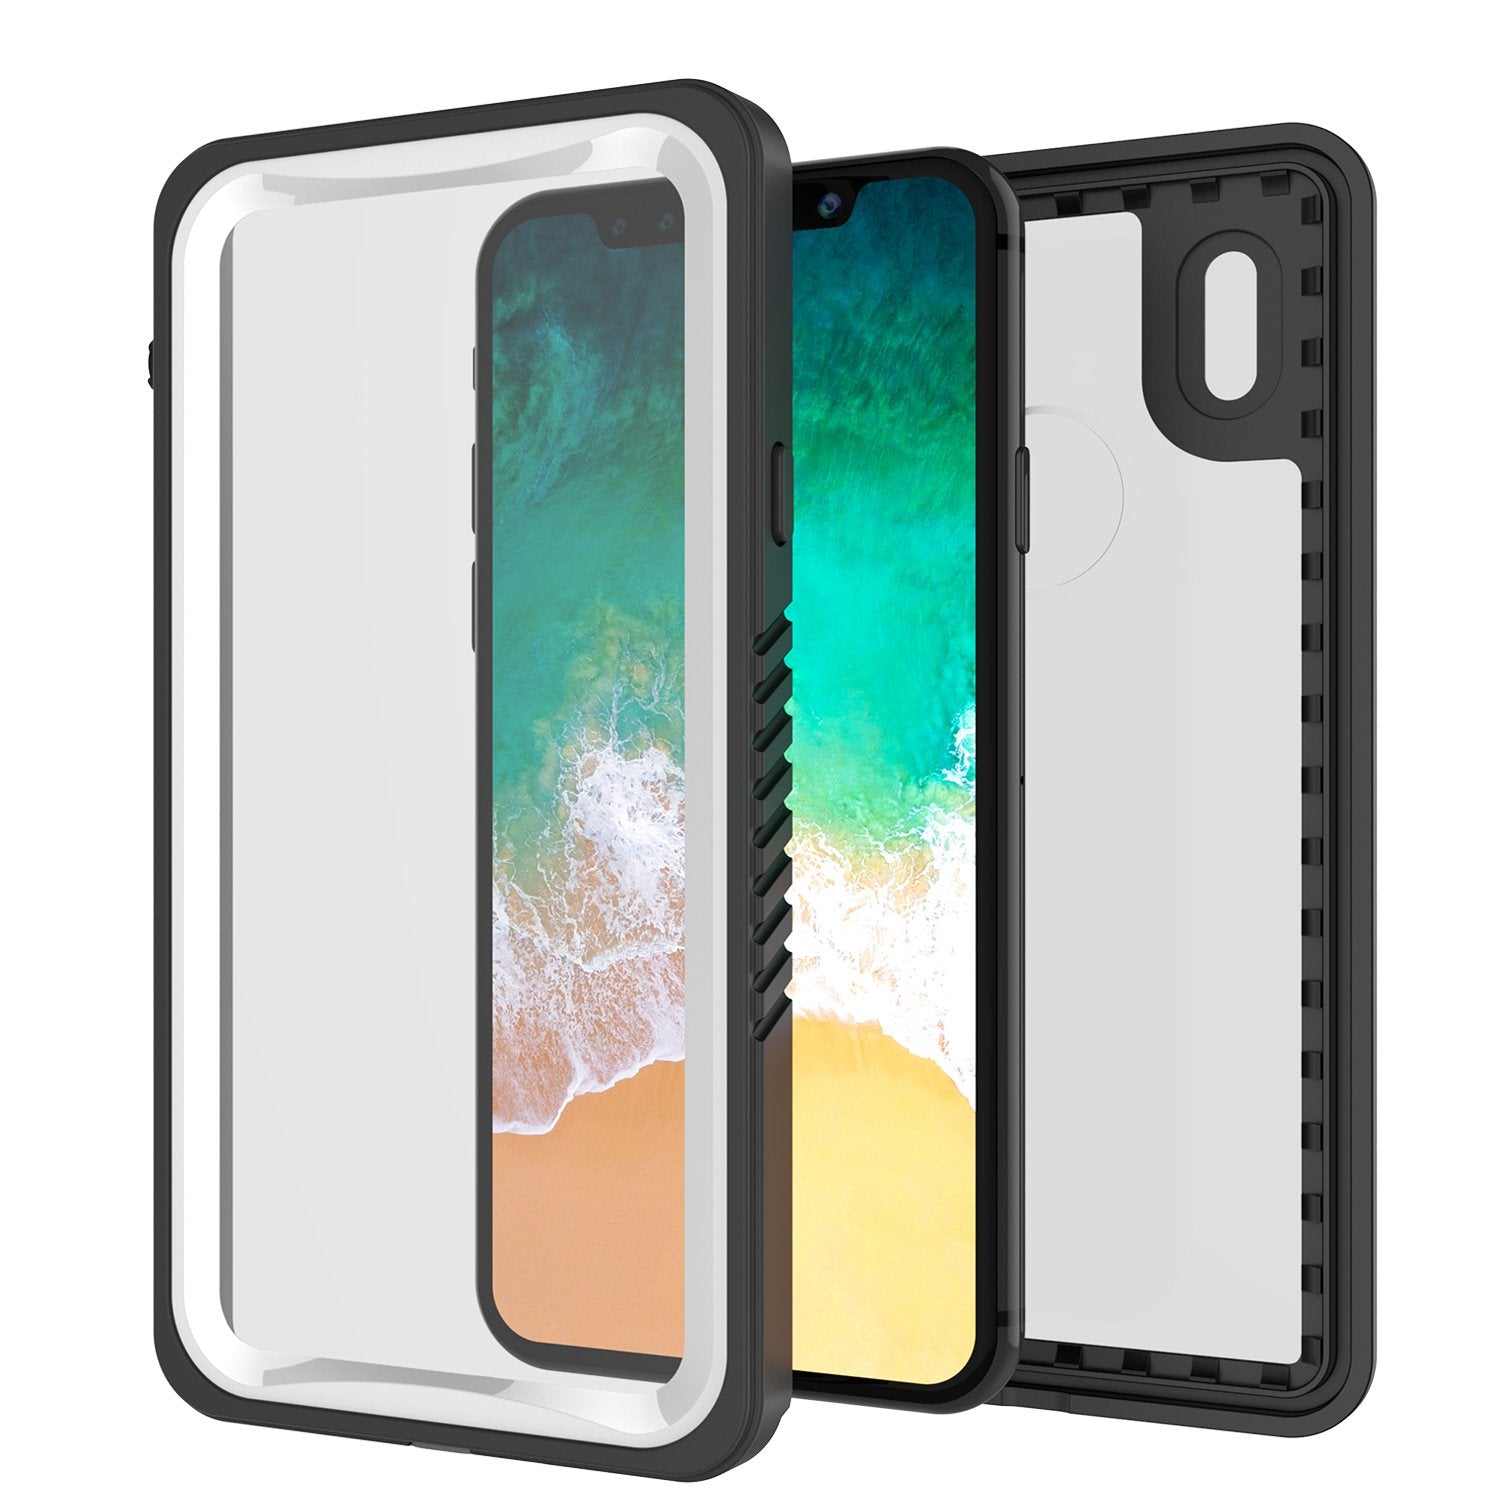 iPhone X Case, Punkcase [Extreme Series] [Slim Fit] [IP68 Certified] [Shockproof] [Snowproof] [Dirproof] Armor Cover W/ Built In Screen Protector for Apple iPhone 10 [White]